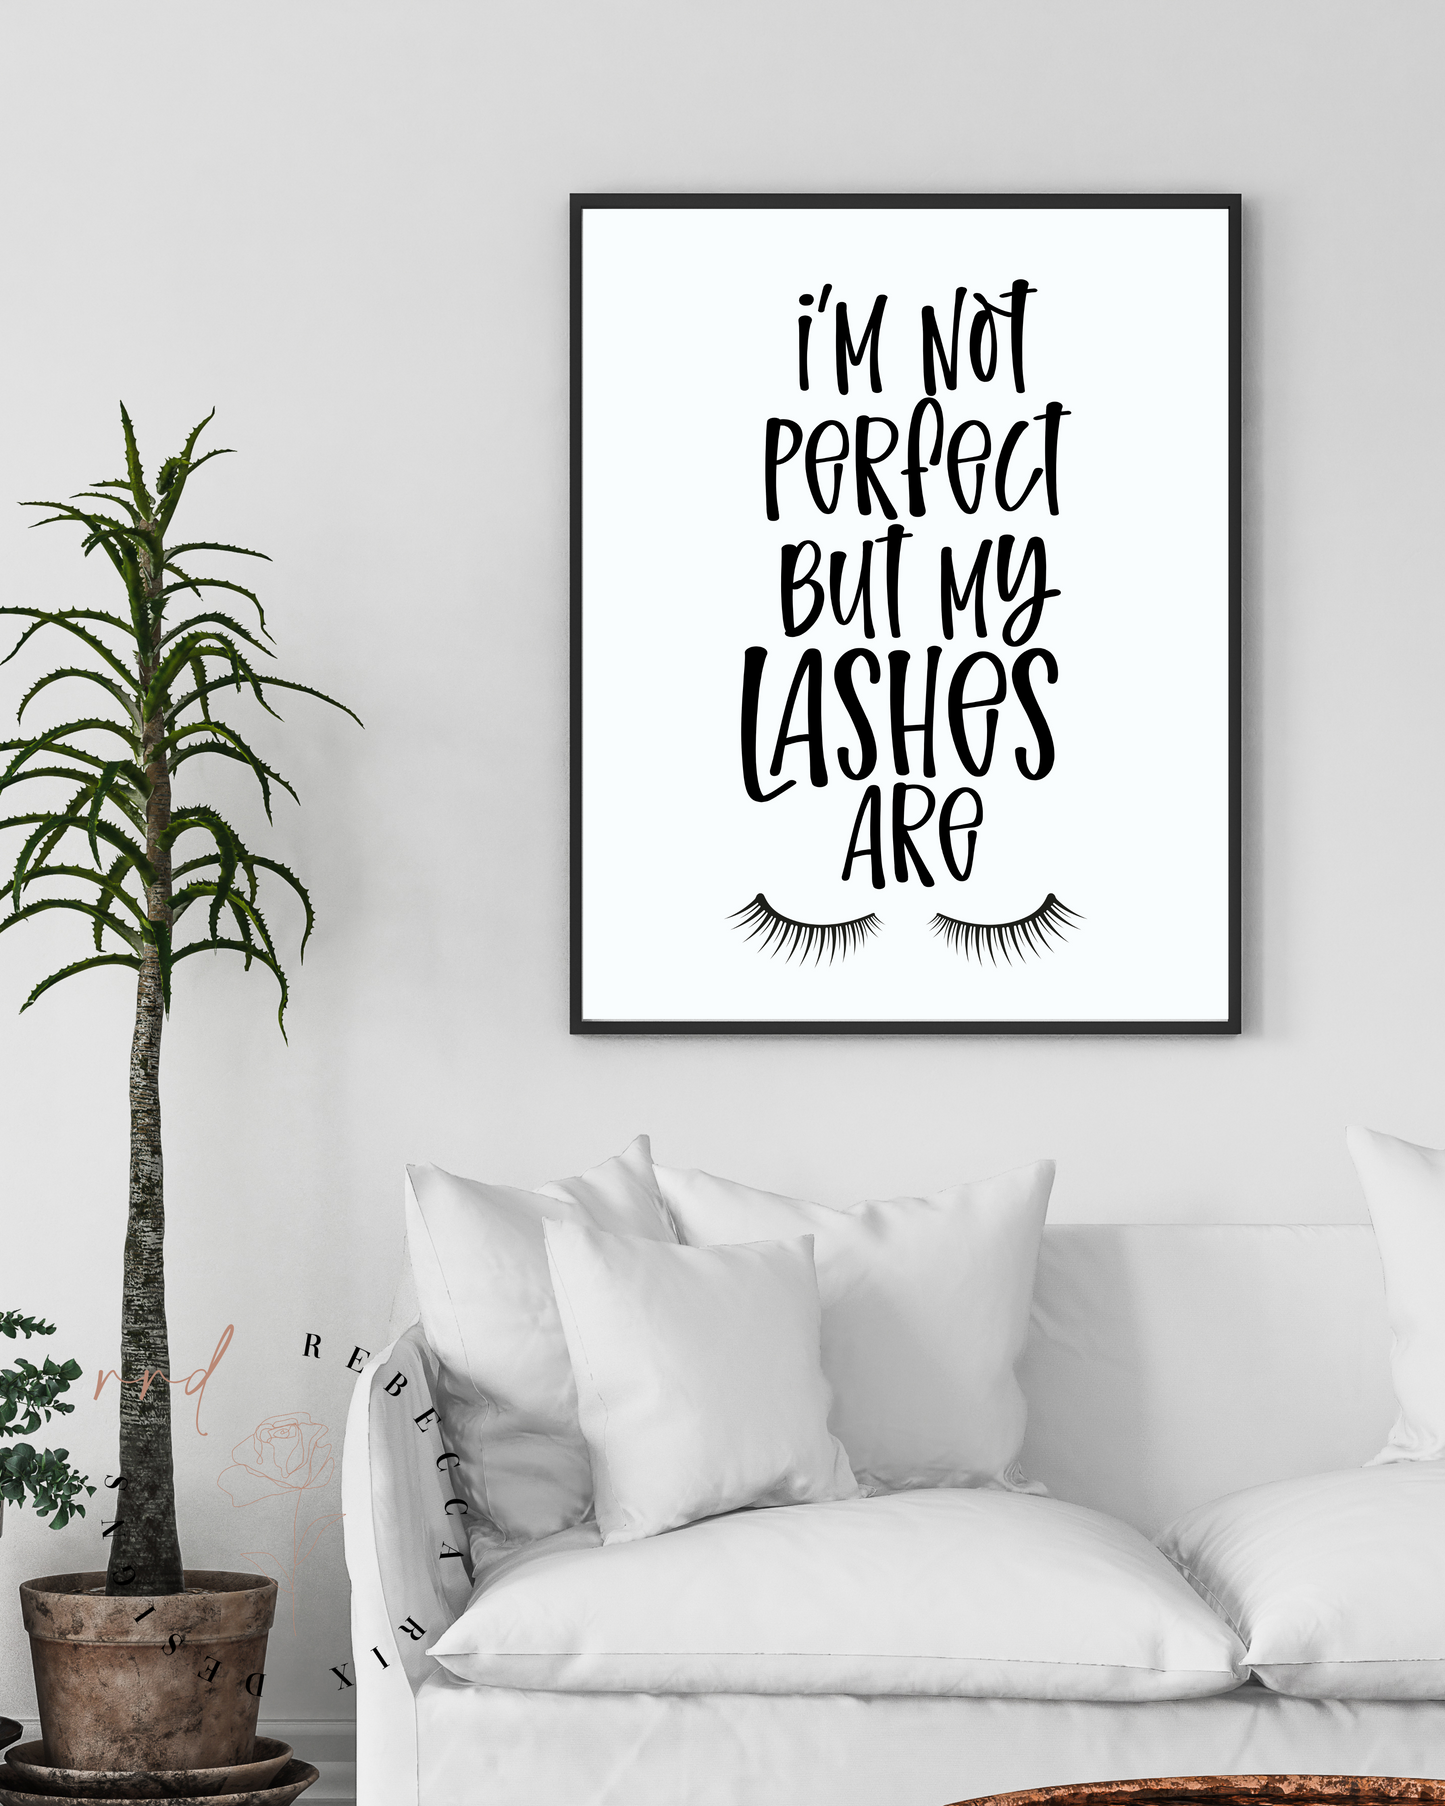 "I'm Not Perfect But My Lashes Are" Girl Beauty Quotes, Printable Wall Art